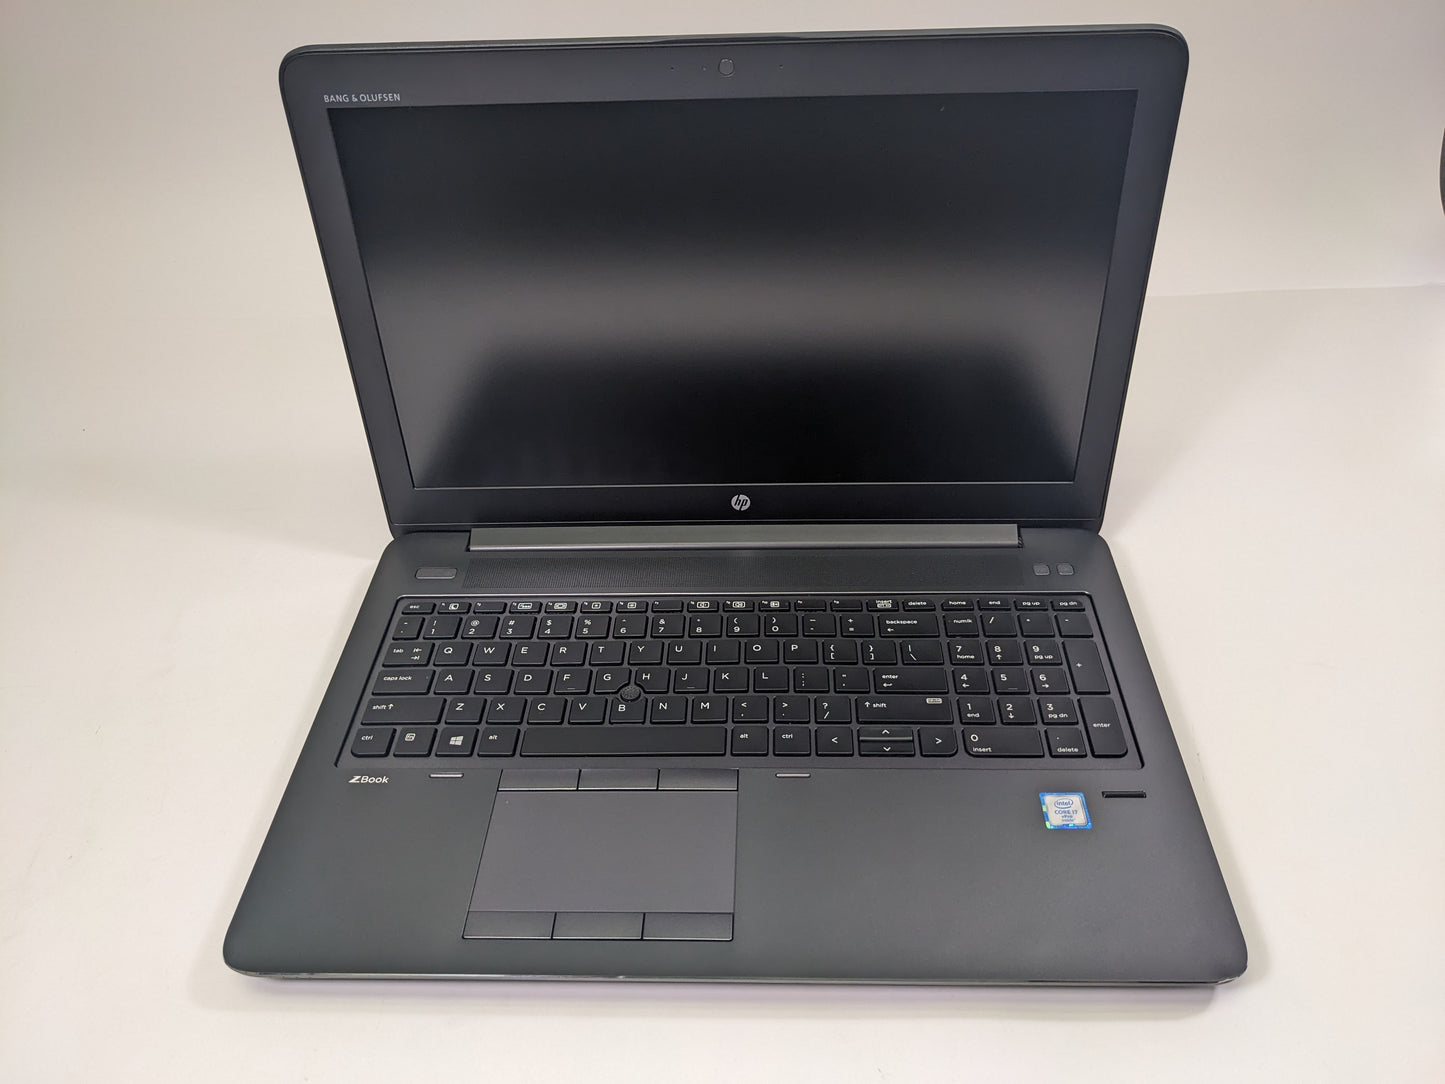 HP ZBook 15 G3 15.6" Mobile Workstation Core i7 16GB 512GB SSD - W8D56UC#ABA 389.99